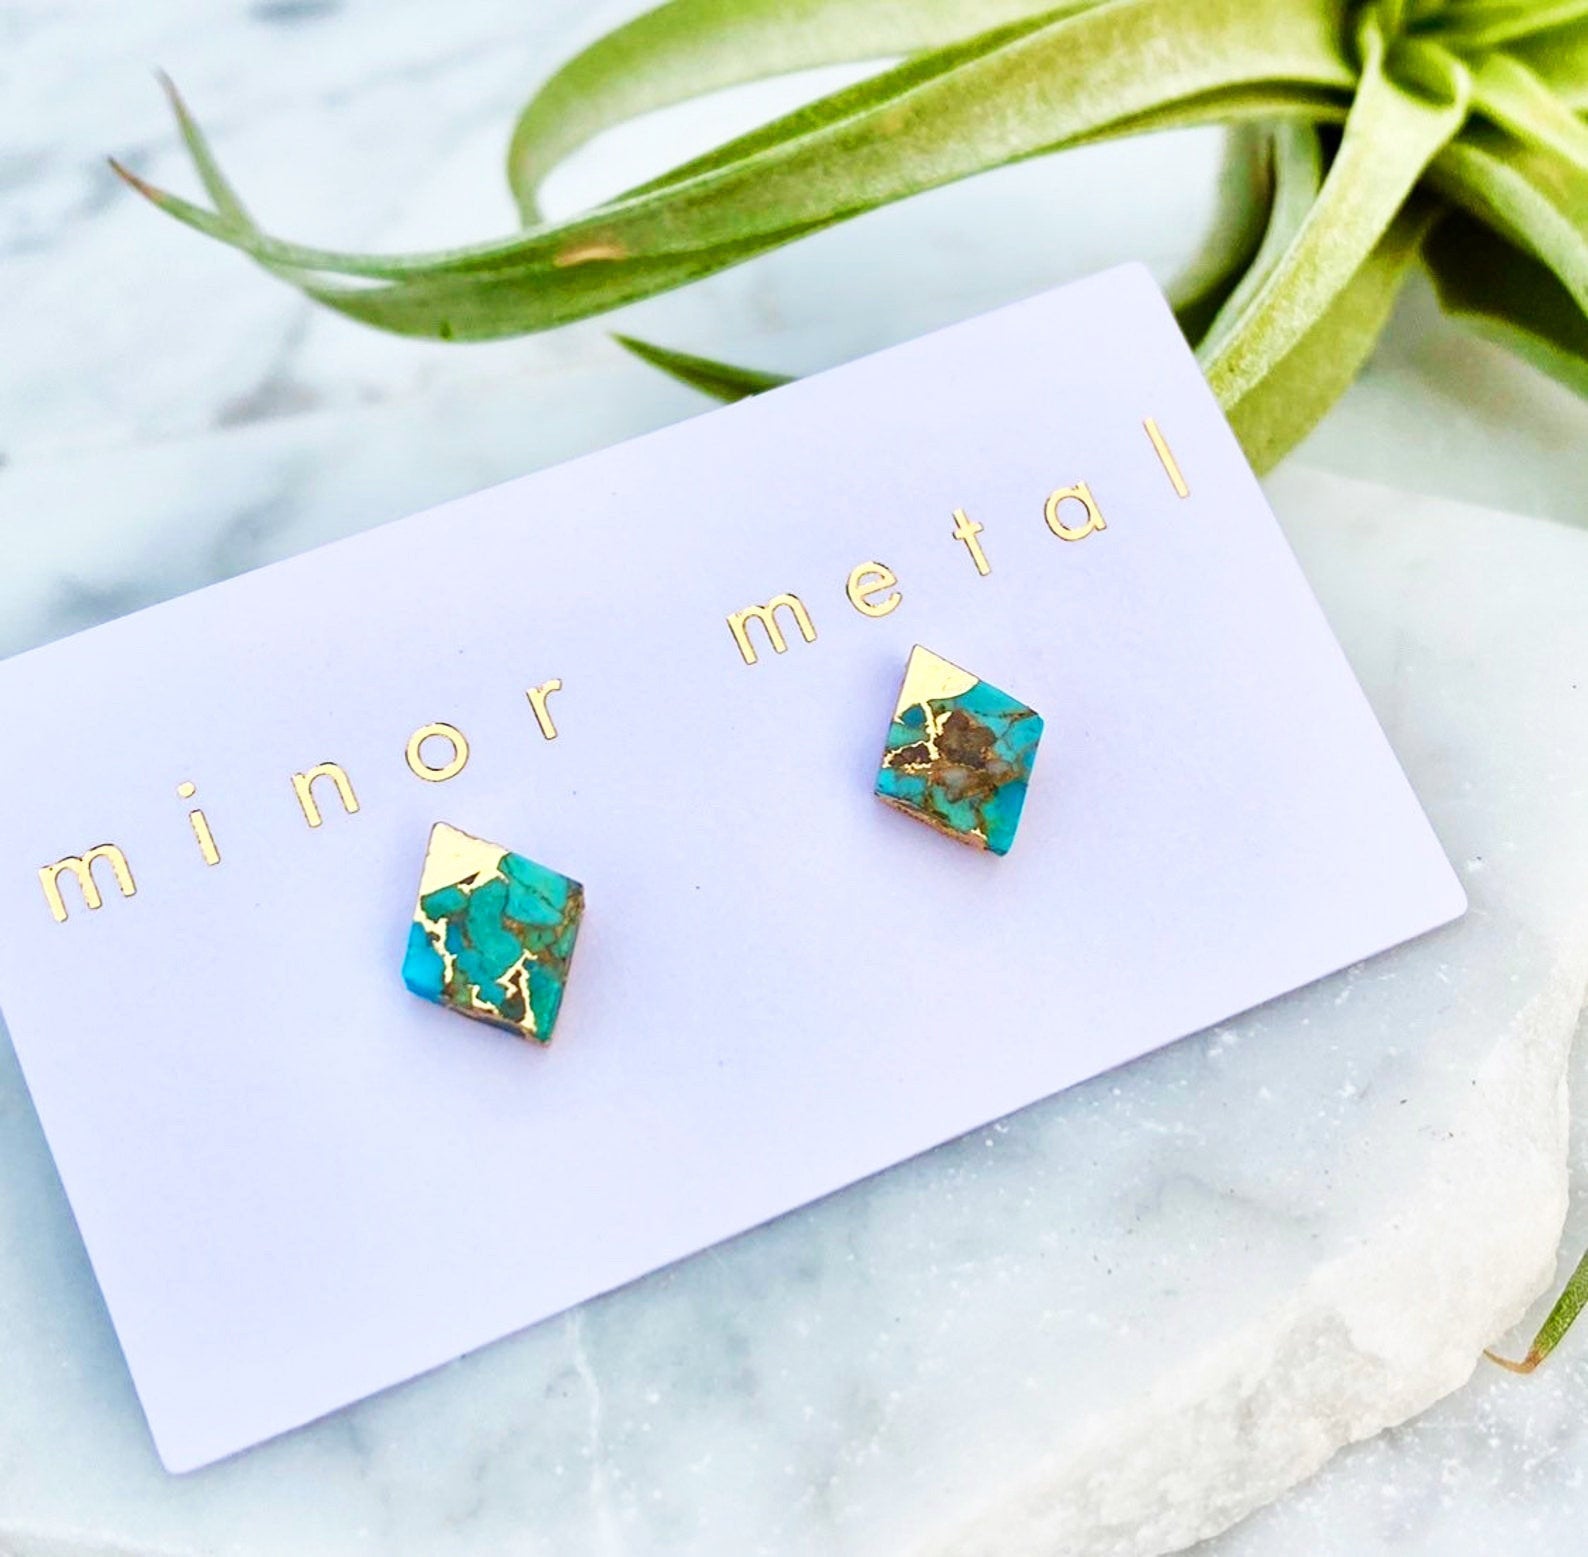 gold-dipped turquoise diamond stud earrings